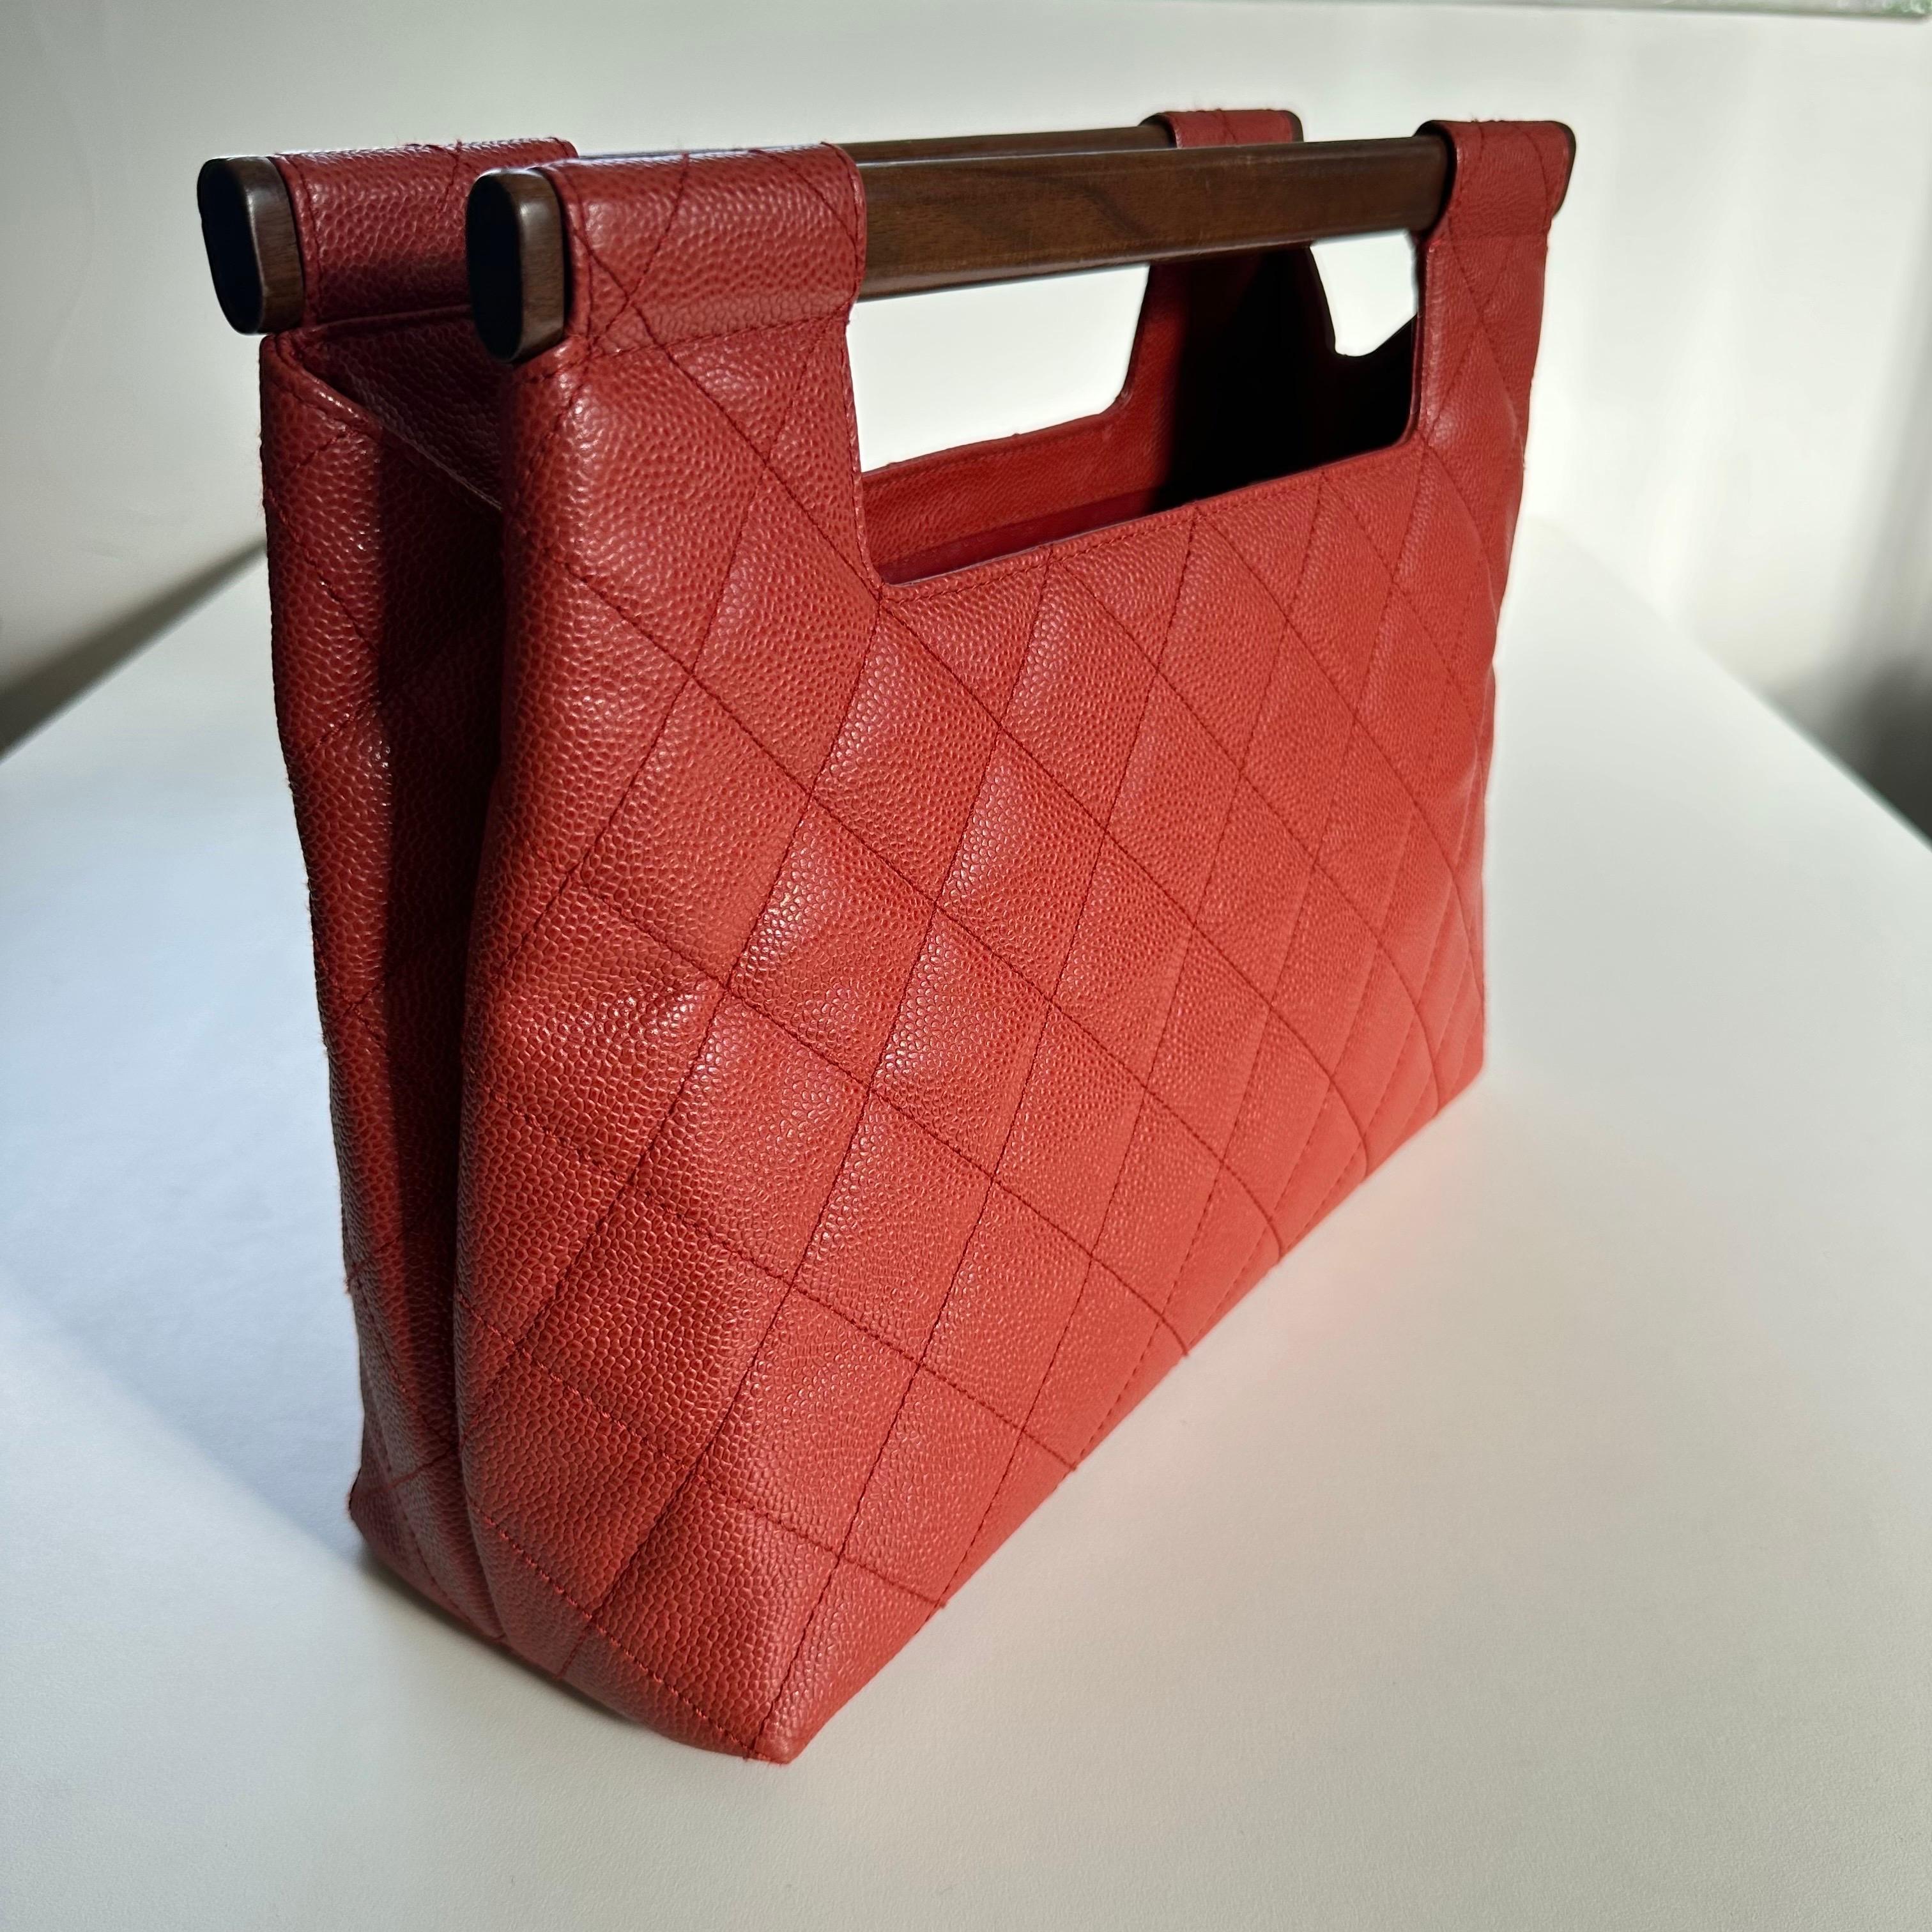 Chanel 2003 Holz Top Handle Rare Red Caviar Jumbo Kelly Envelope Clutch Tote Bag im Angebot 6